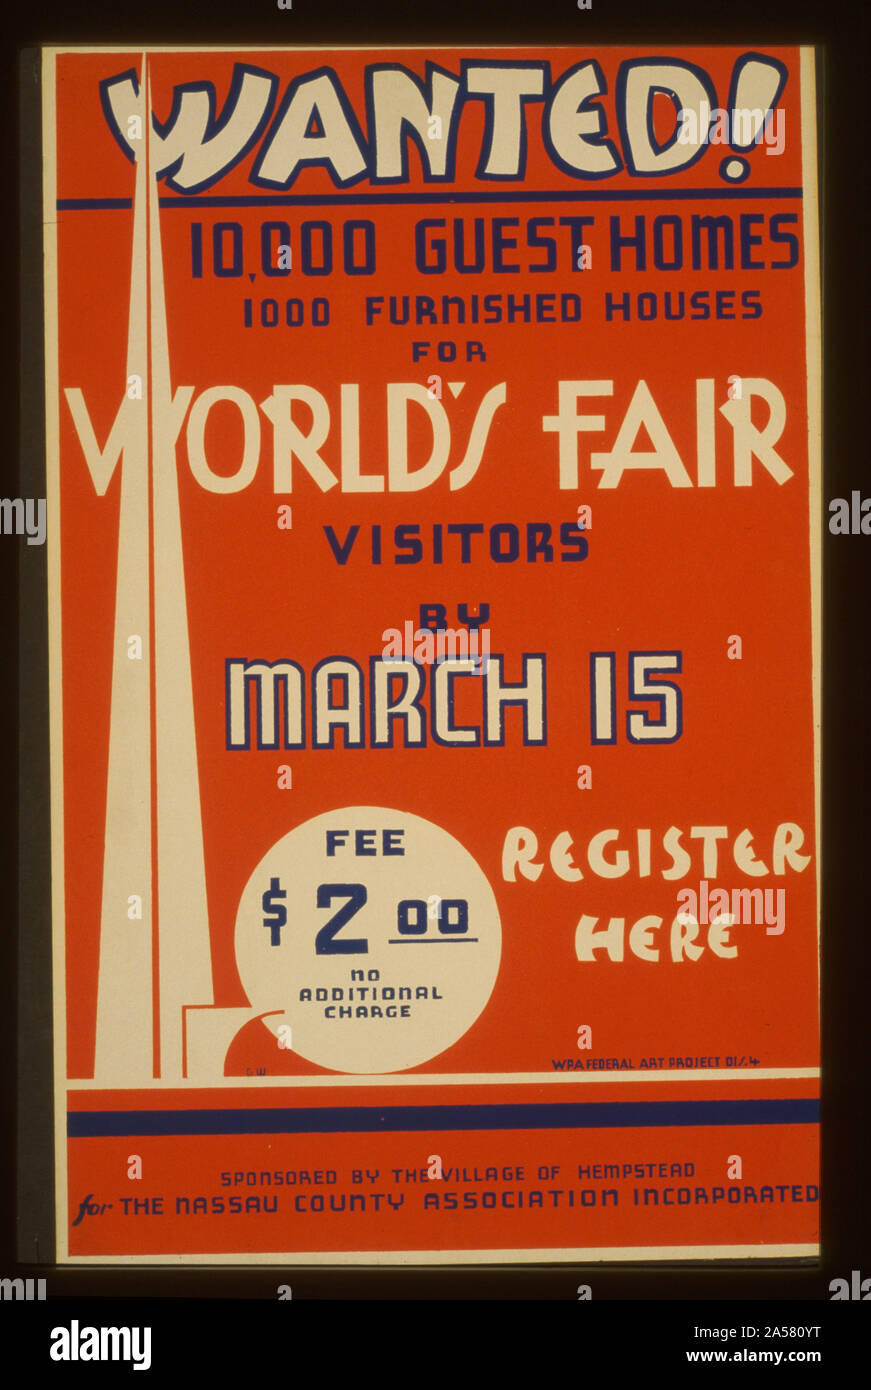 Wanted! 10,000 guest homes, 1000 furnished houses for World's Fair visitors by March 15 Abstract: Poster calling for guest homes to be available during the New York World's Fair. Stock Photo